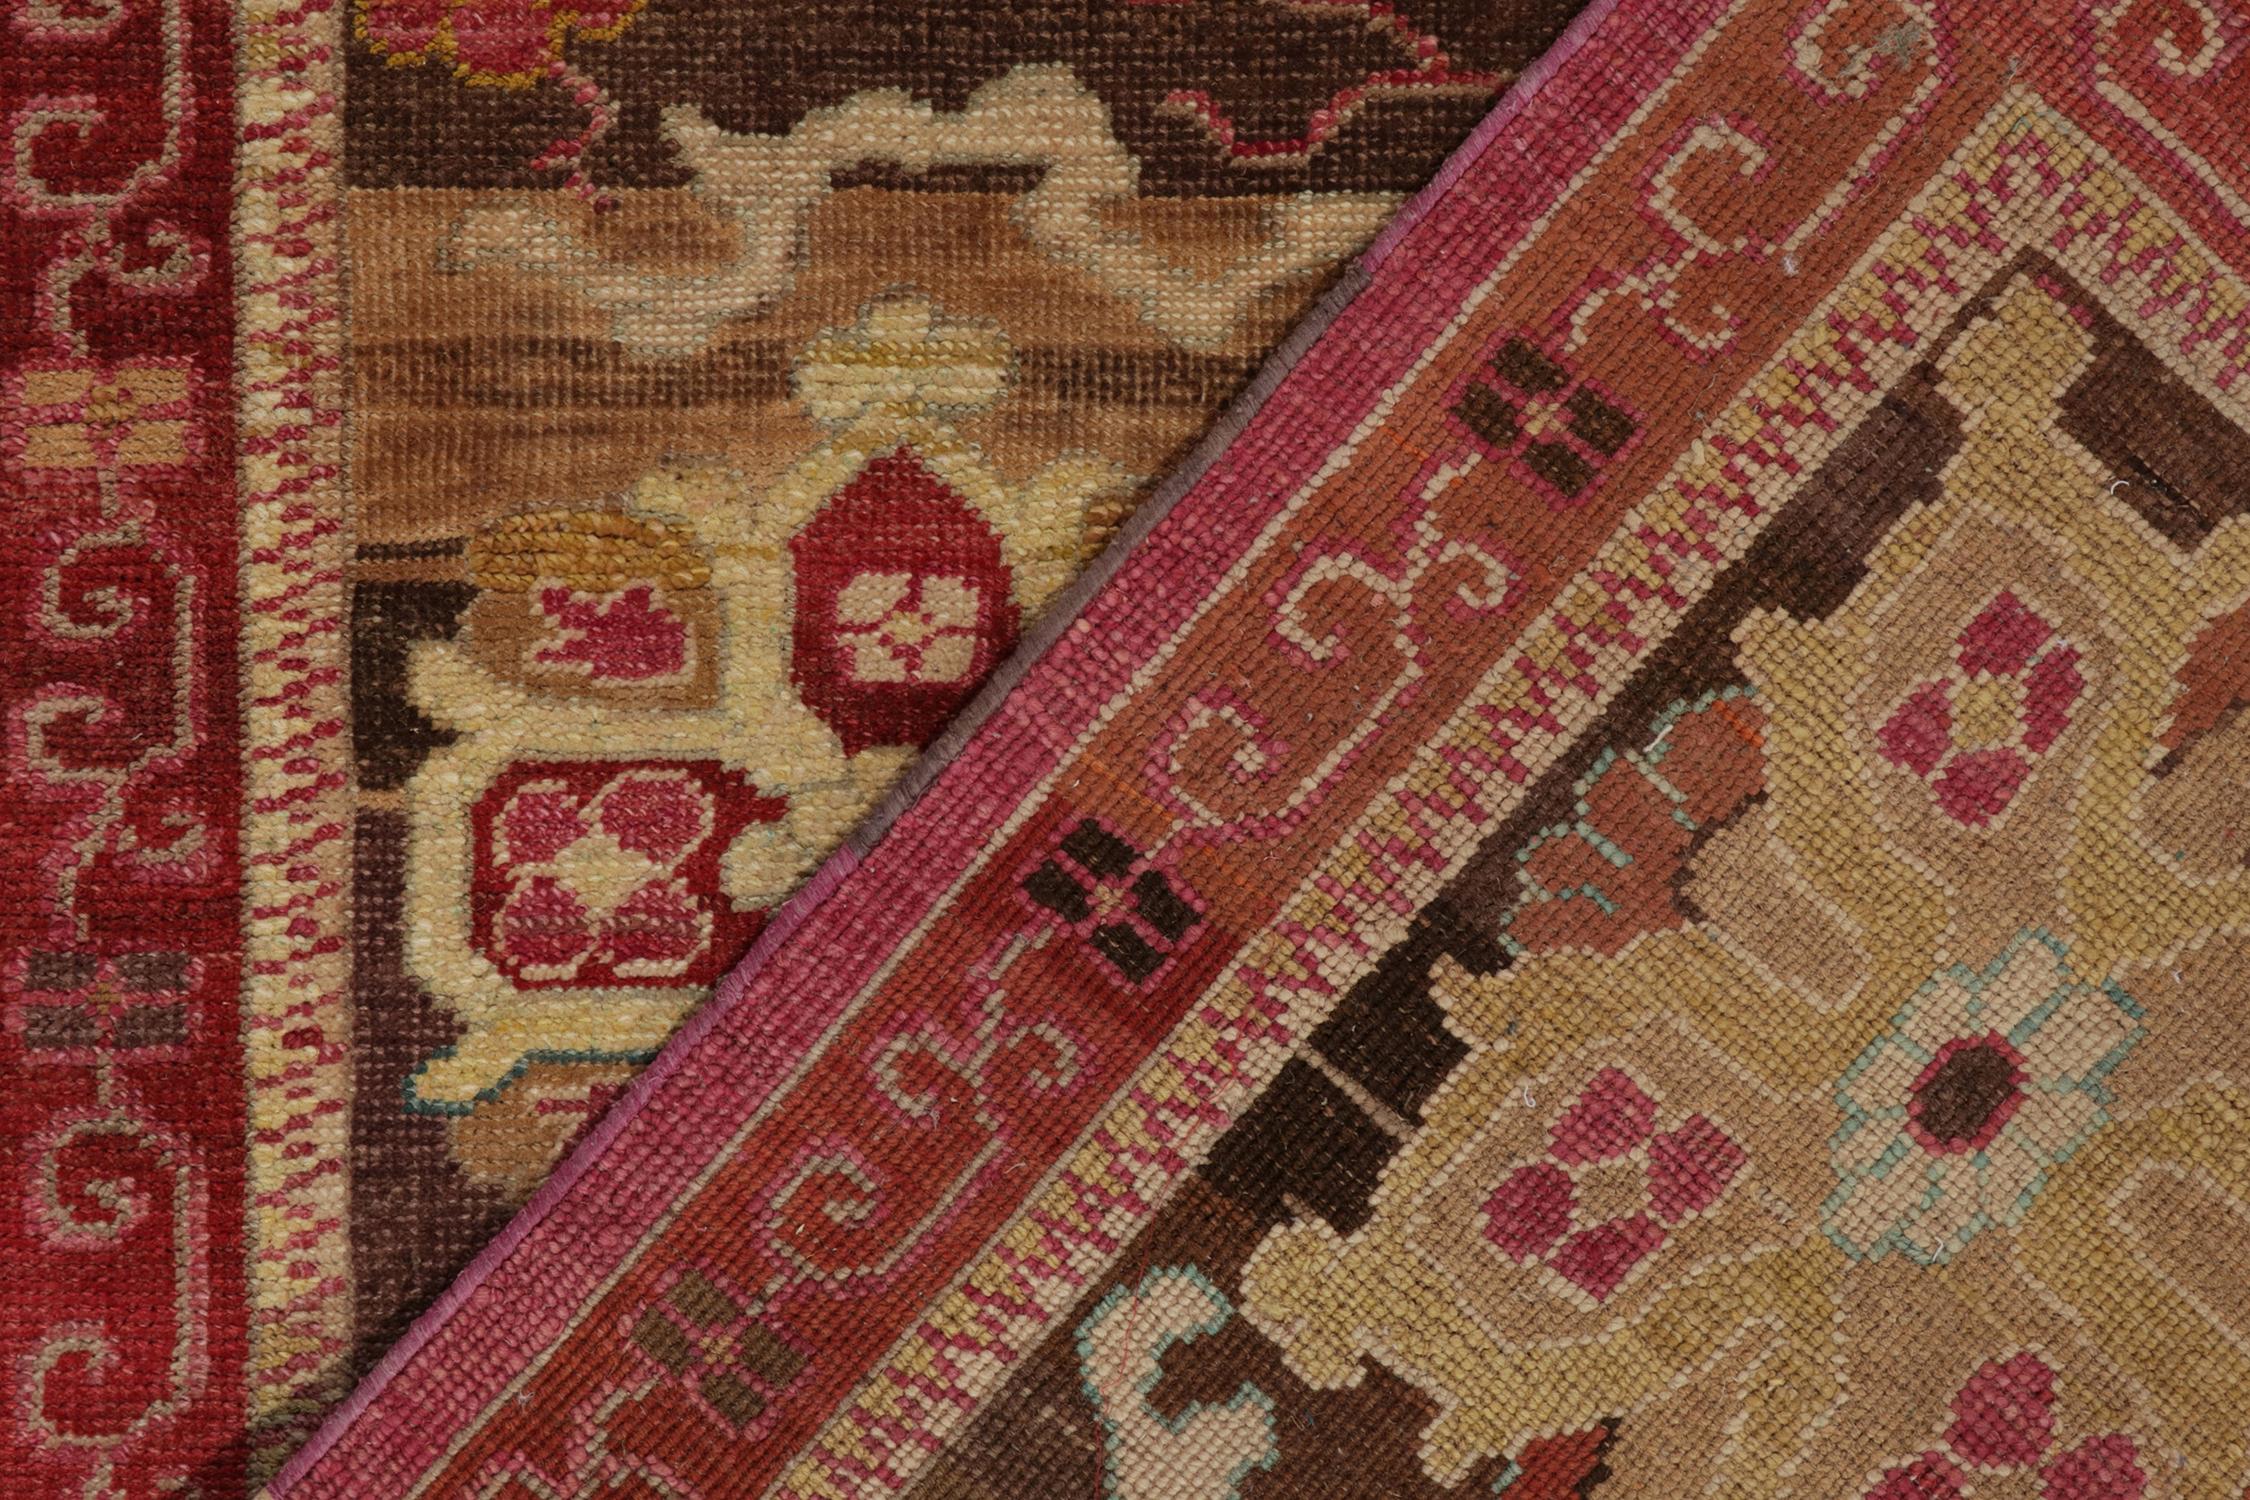 Rug & Kilim’s Classic Style Square Rug in Pink, Red and Beige-Brown Florals In New Condition For Sale In Long Island City, NY